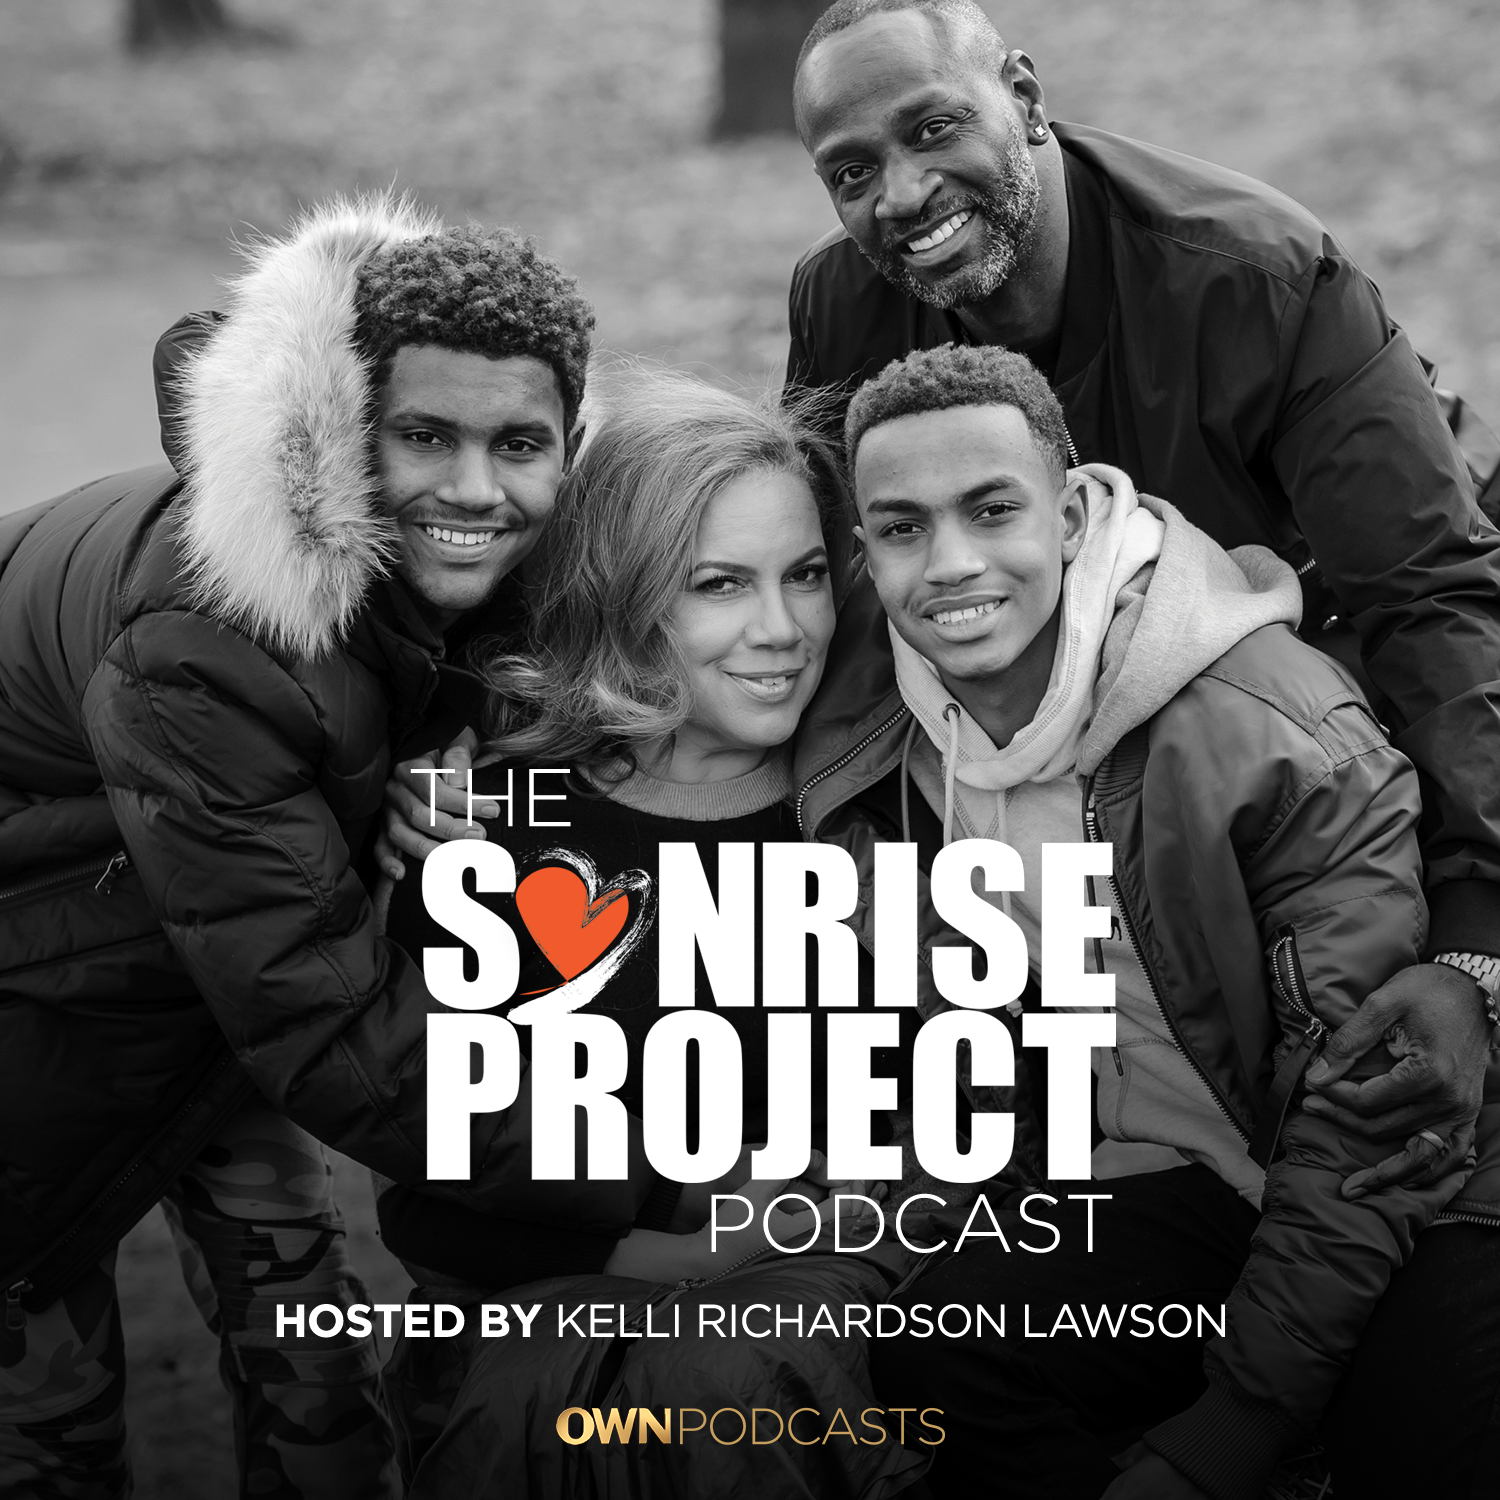 After Her Son’s Suicide Attempt, Kelli Richardson Lawson Created A Podcast To Help Youth And Parents Alike Heal